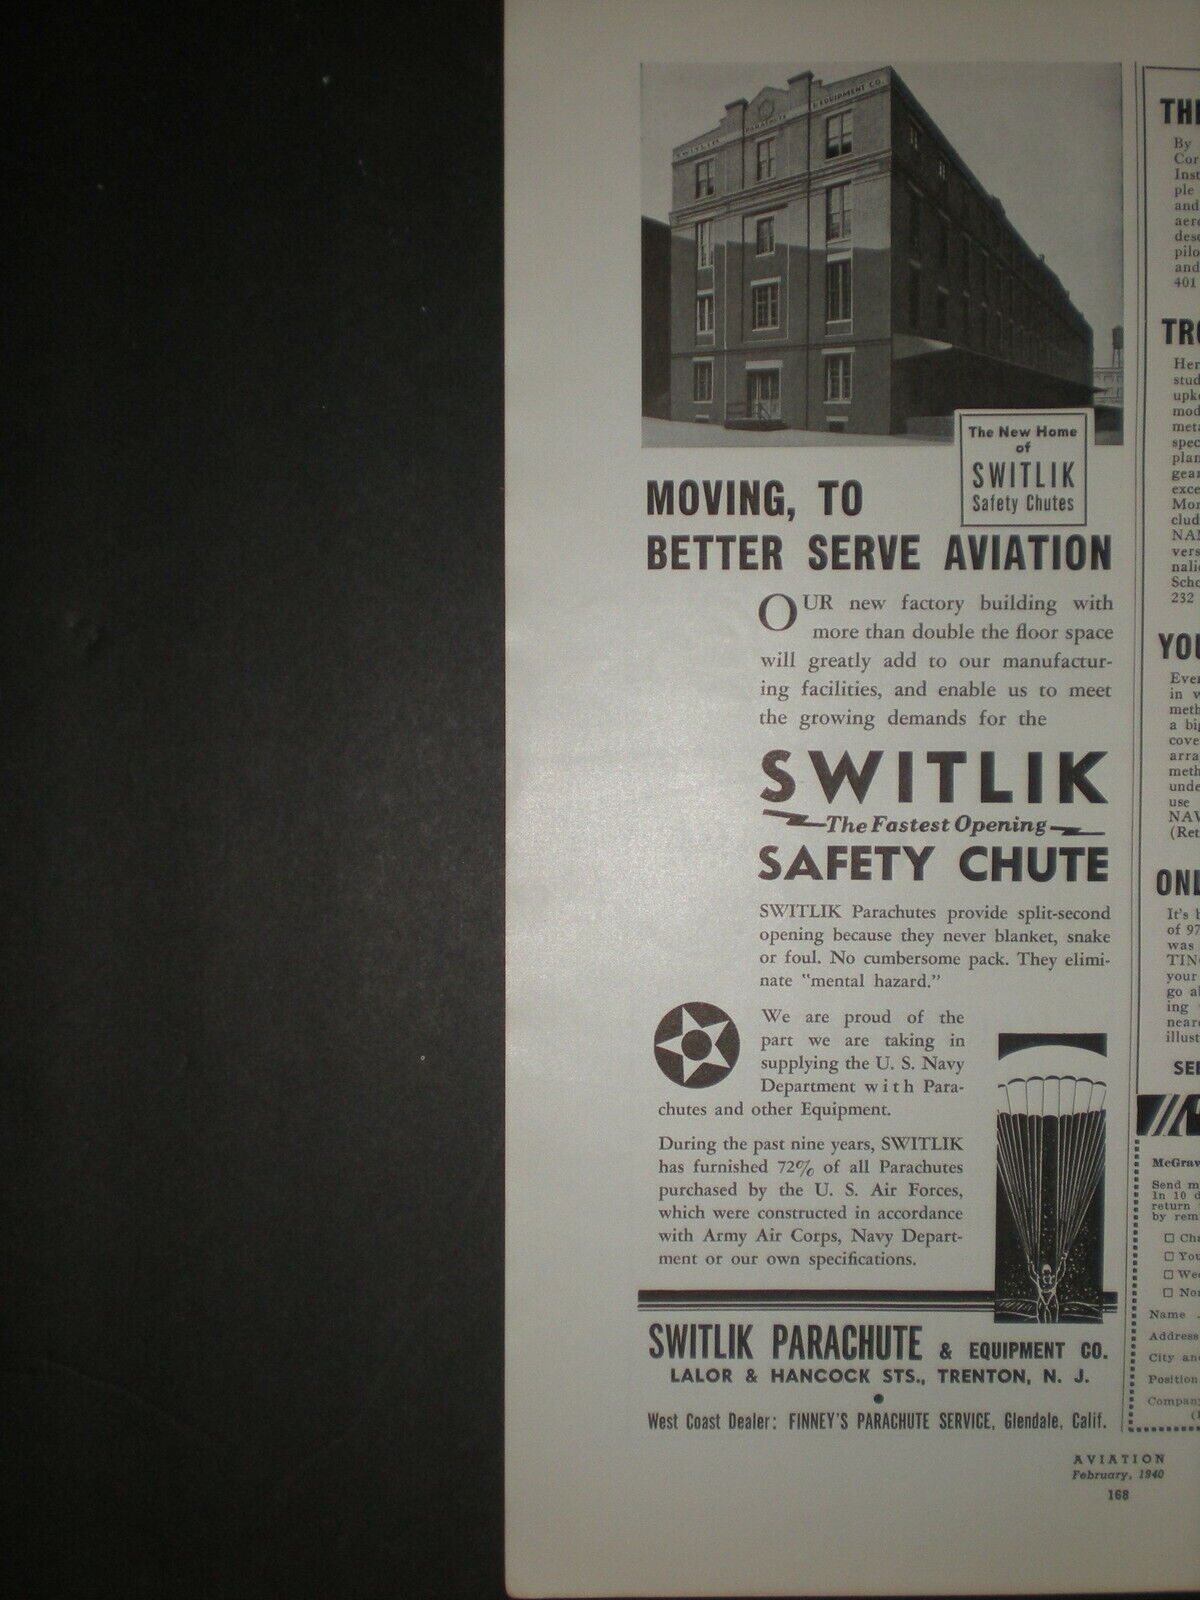 1940 SWITLIK SAFETY CHUTE PARACHUTE NEW FACTORY WWII vintage Trade print ad